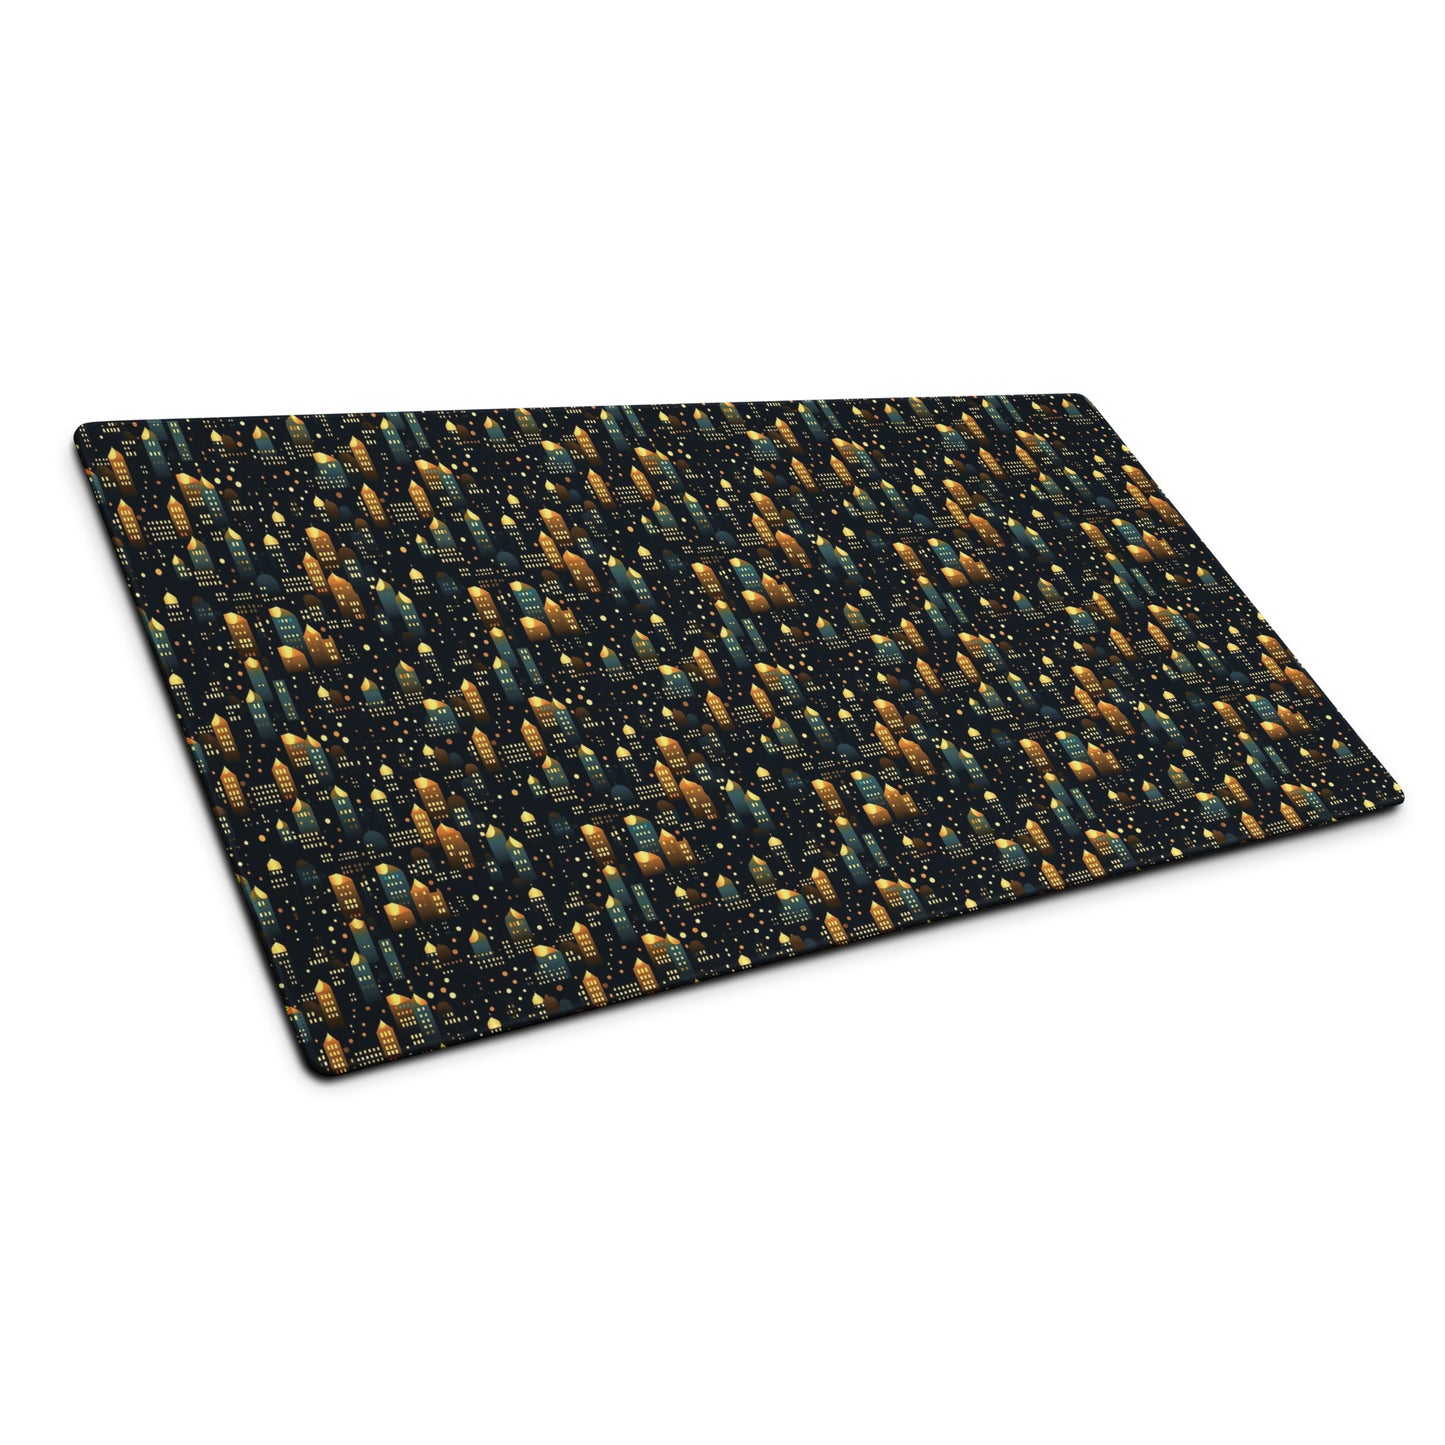 A 36" x 18" desk pad with a stary city pattern sitting at an angle.